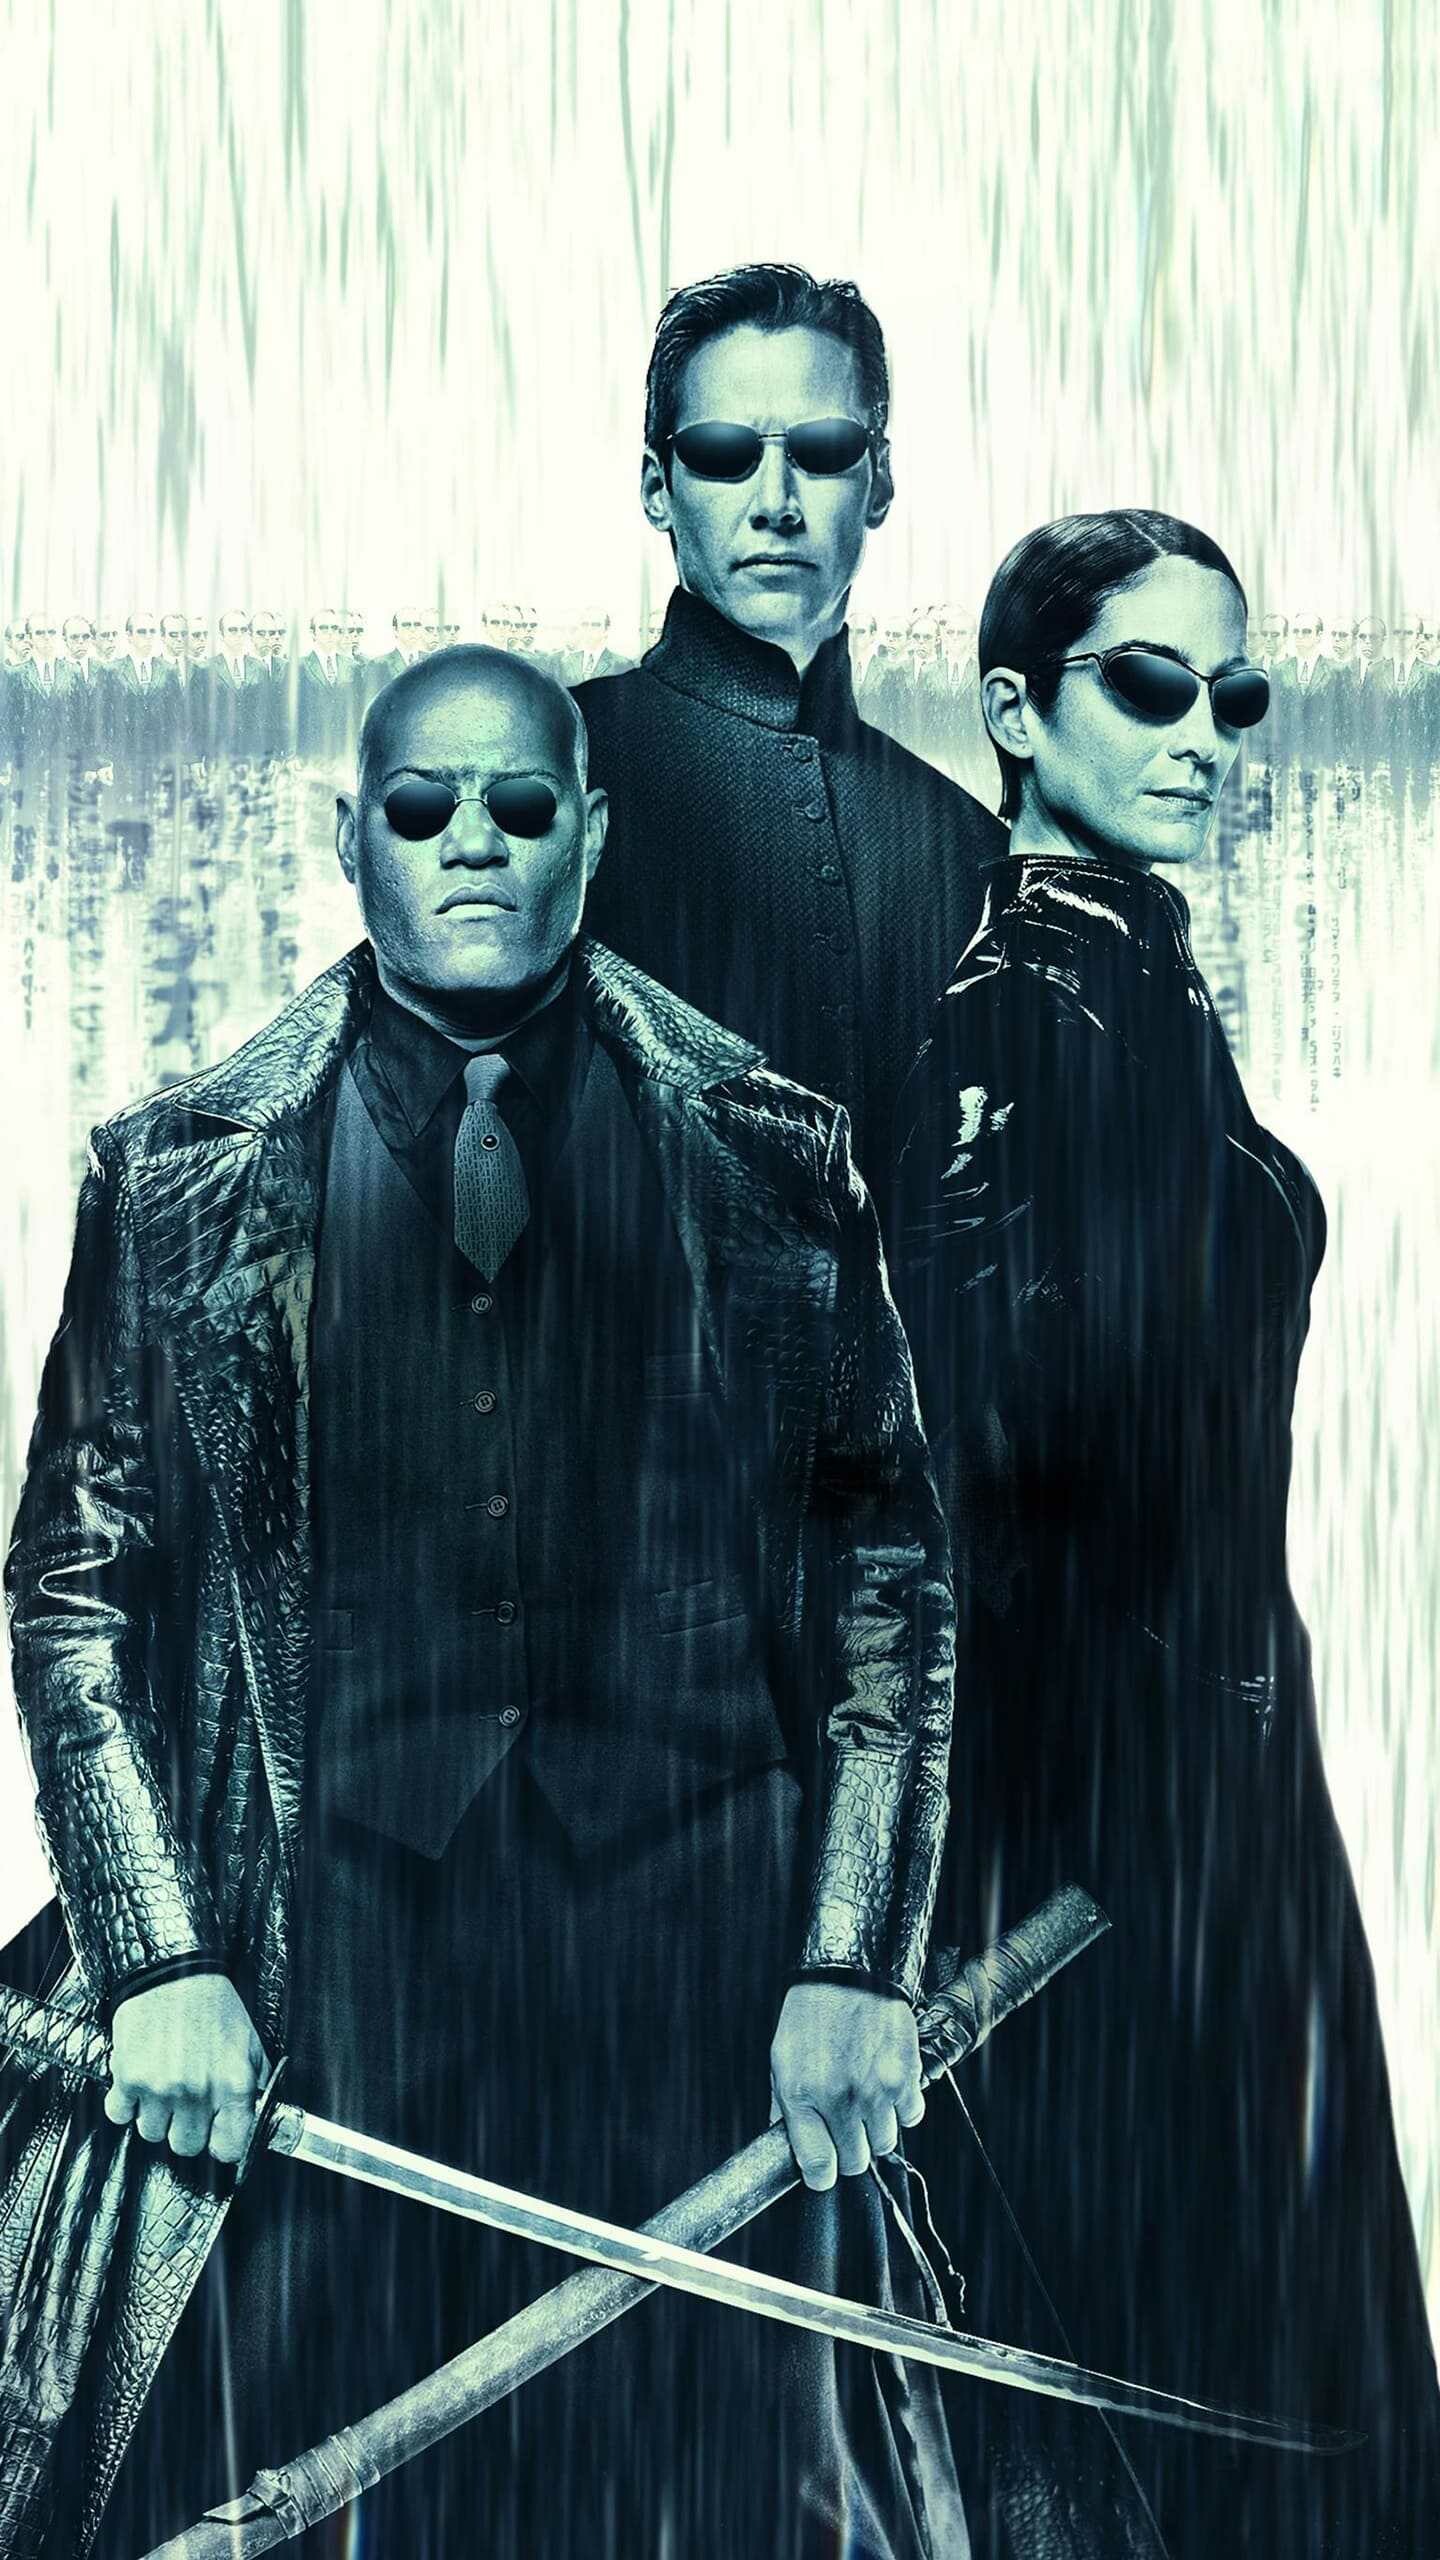 Matrix Franchise: A simulated reality created by sentient Machines, Neo, Trinity. 1440x2560 HD Background.